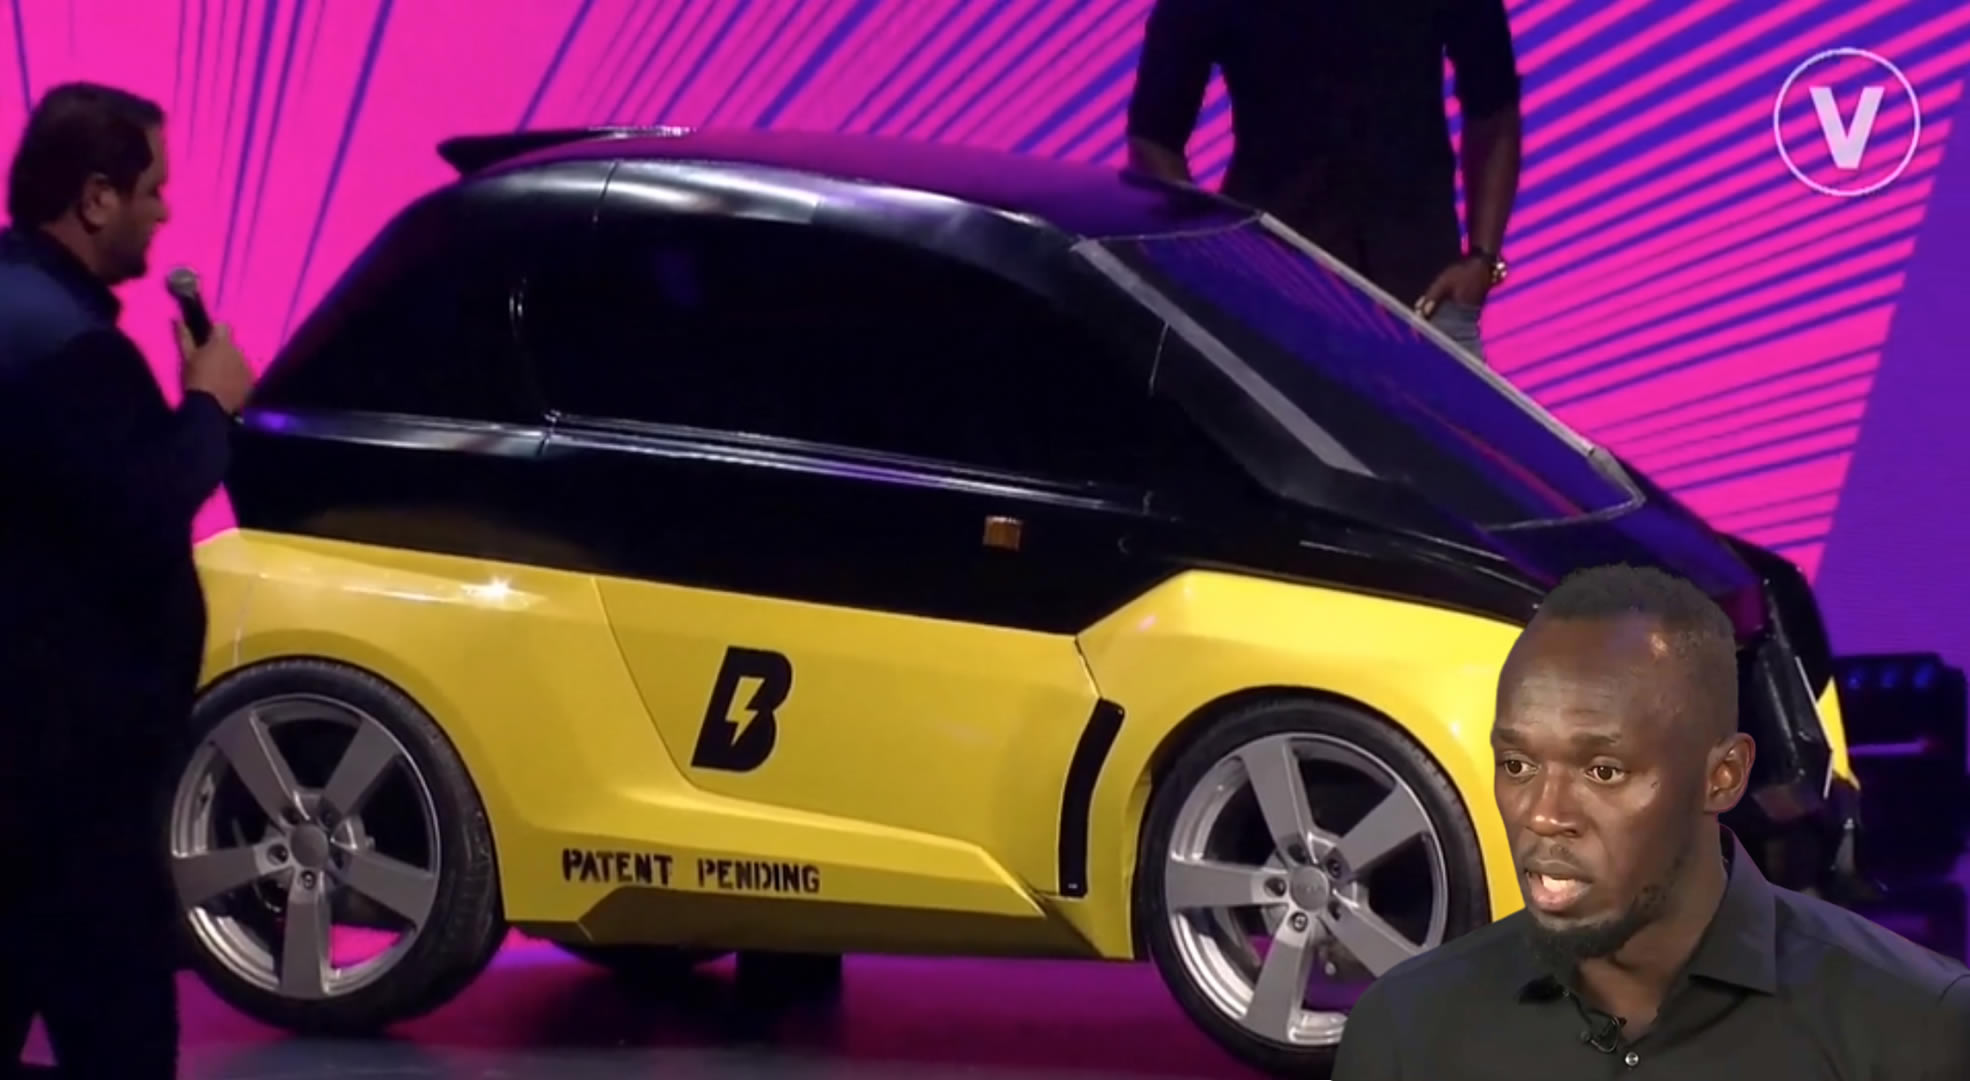 Usain Bolt becomes an investor, unveils small electric Car in Paris